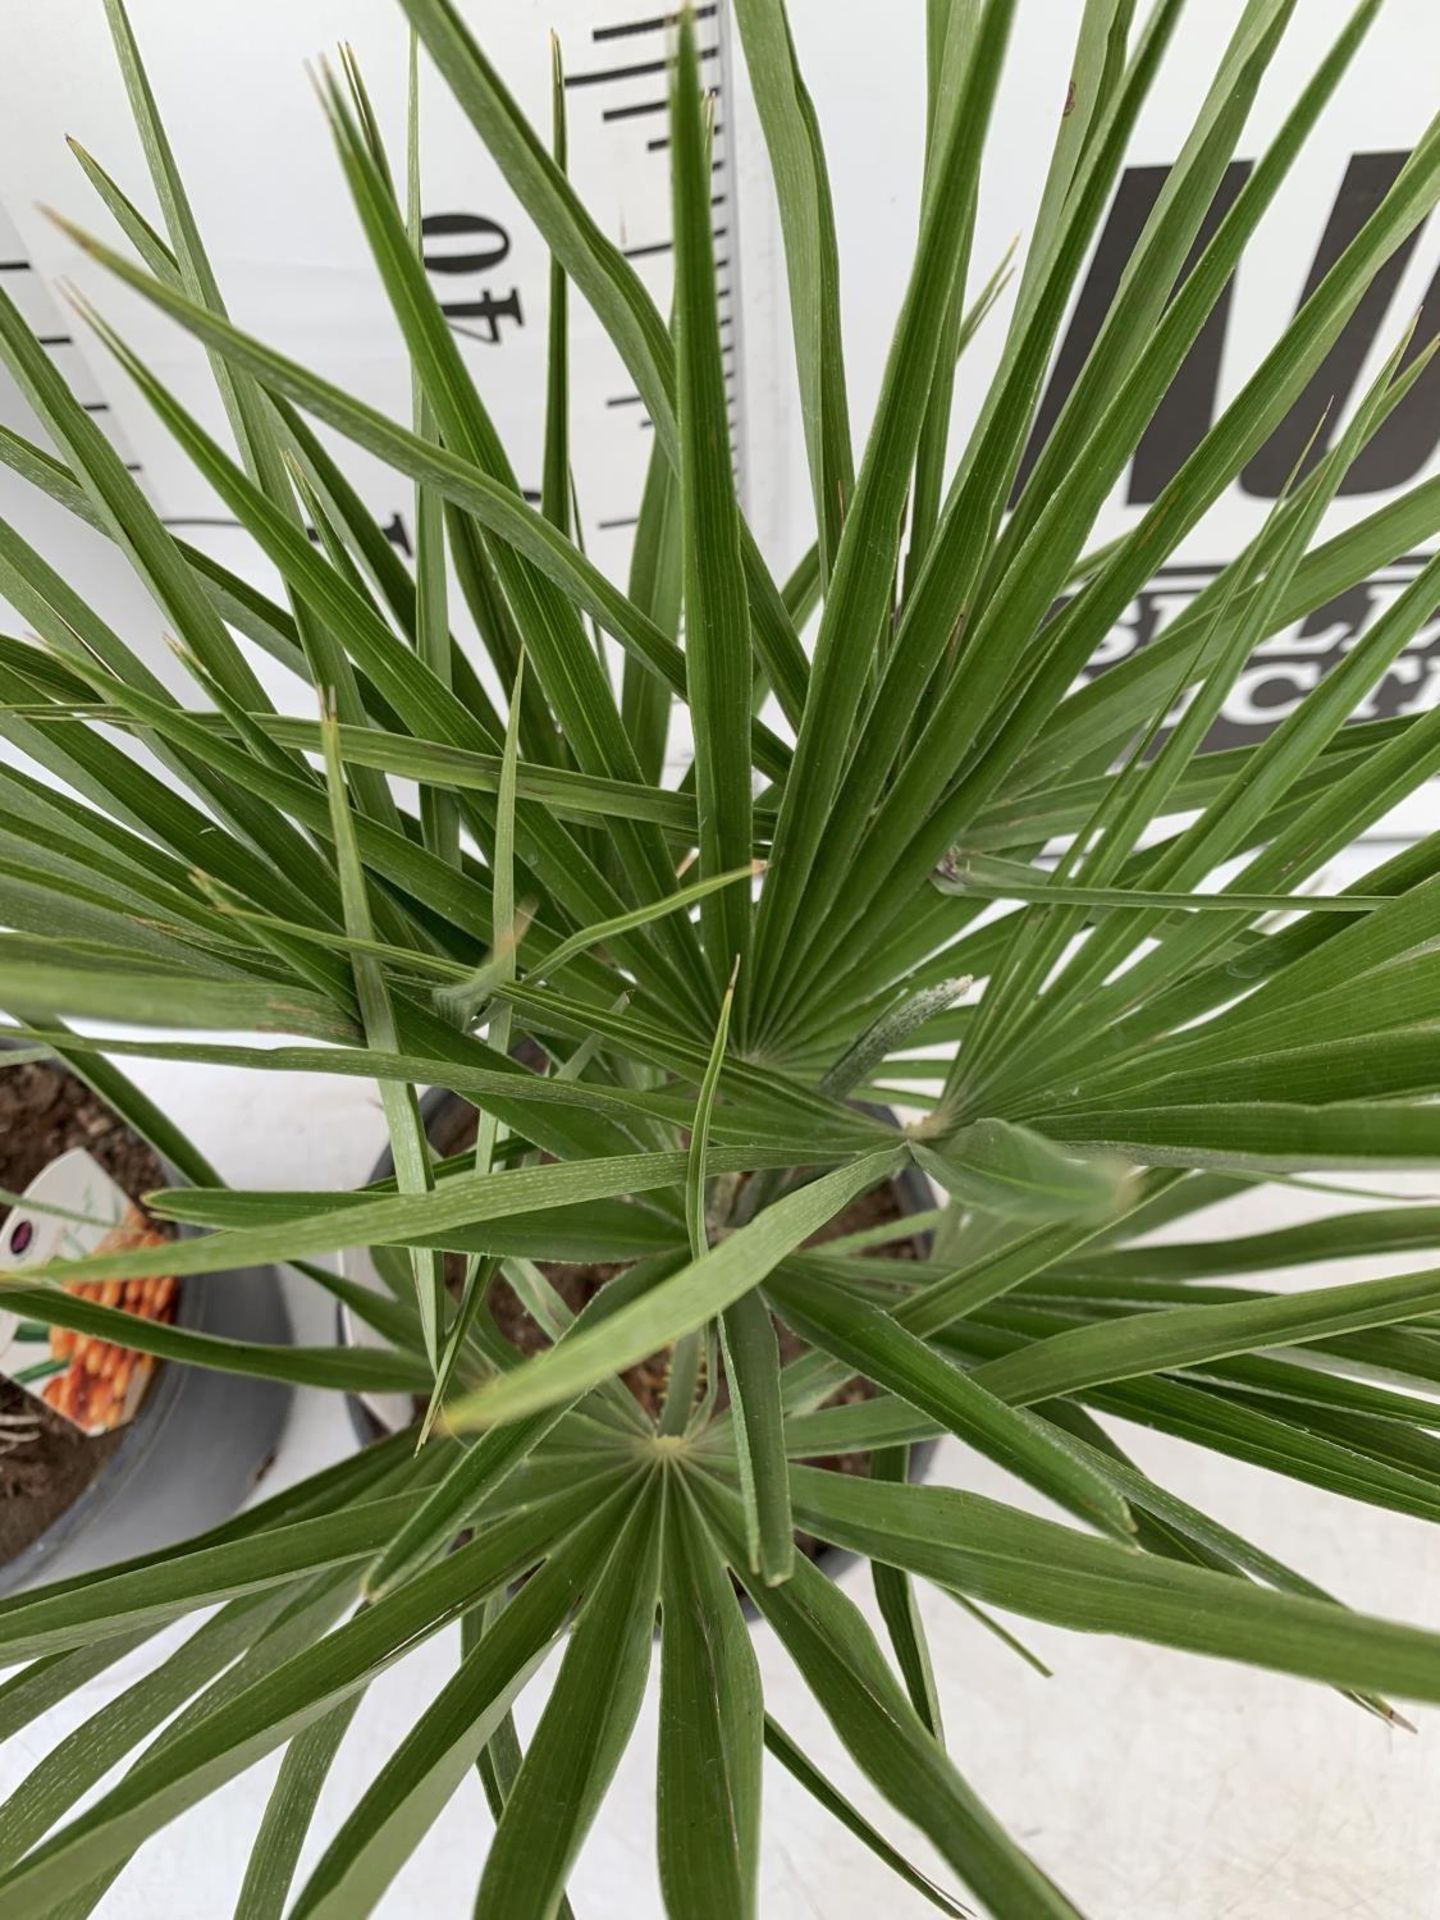 TWO CHAMAEROPS HUMILIS HARDY IN 3 LTR POTS APPROX 60CM IN HEIGHT PLUS VAT TO BE SOLD FOR THE TWO - Bild 5 aus 6